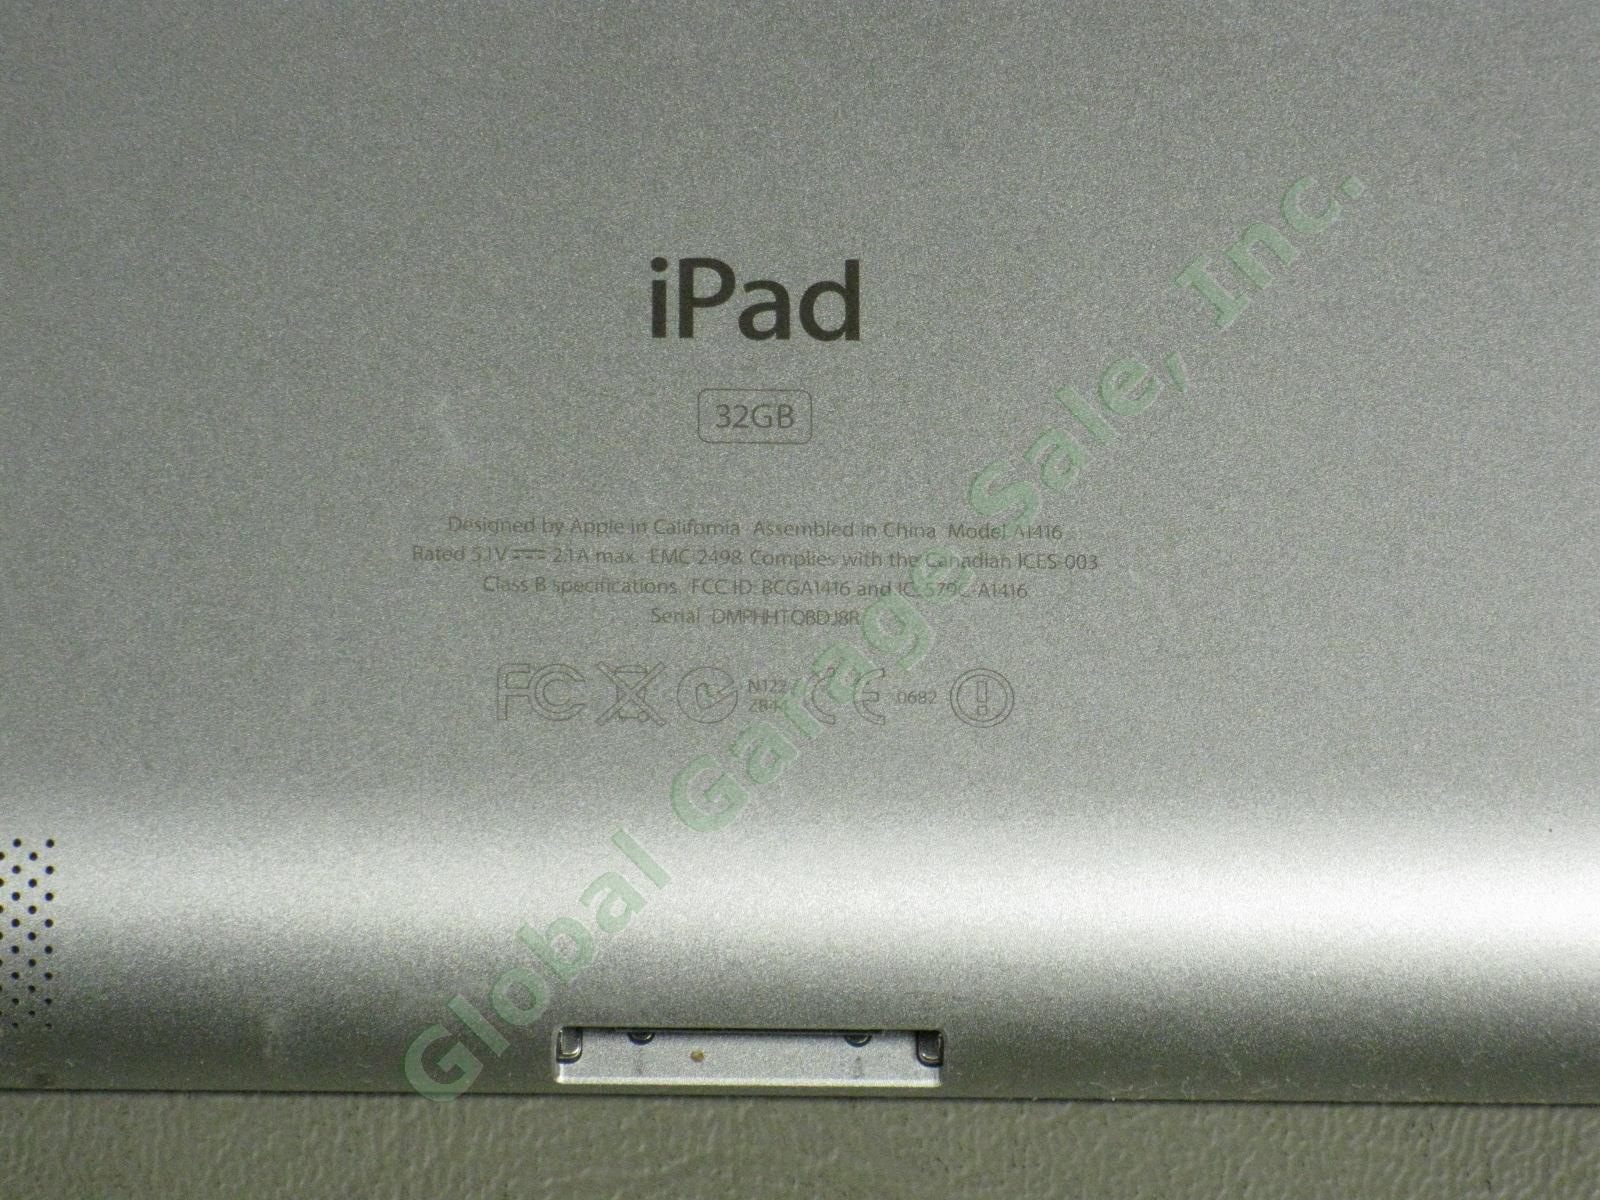 Apple iPad A1416 32GB Wifi 3rd Generation Tablet MC706LL/A One Owner Works Great 5